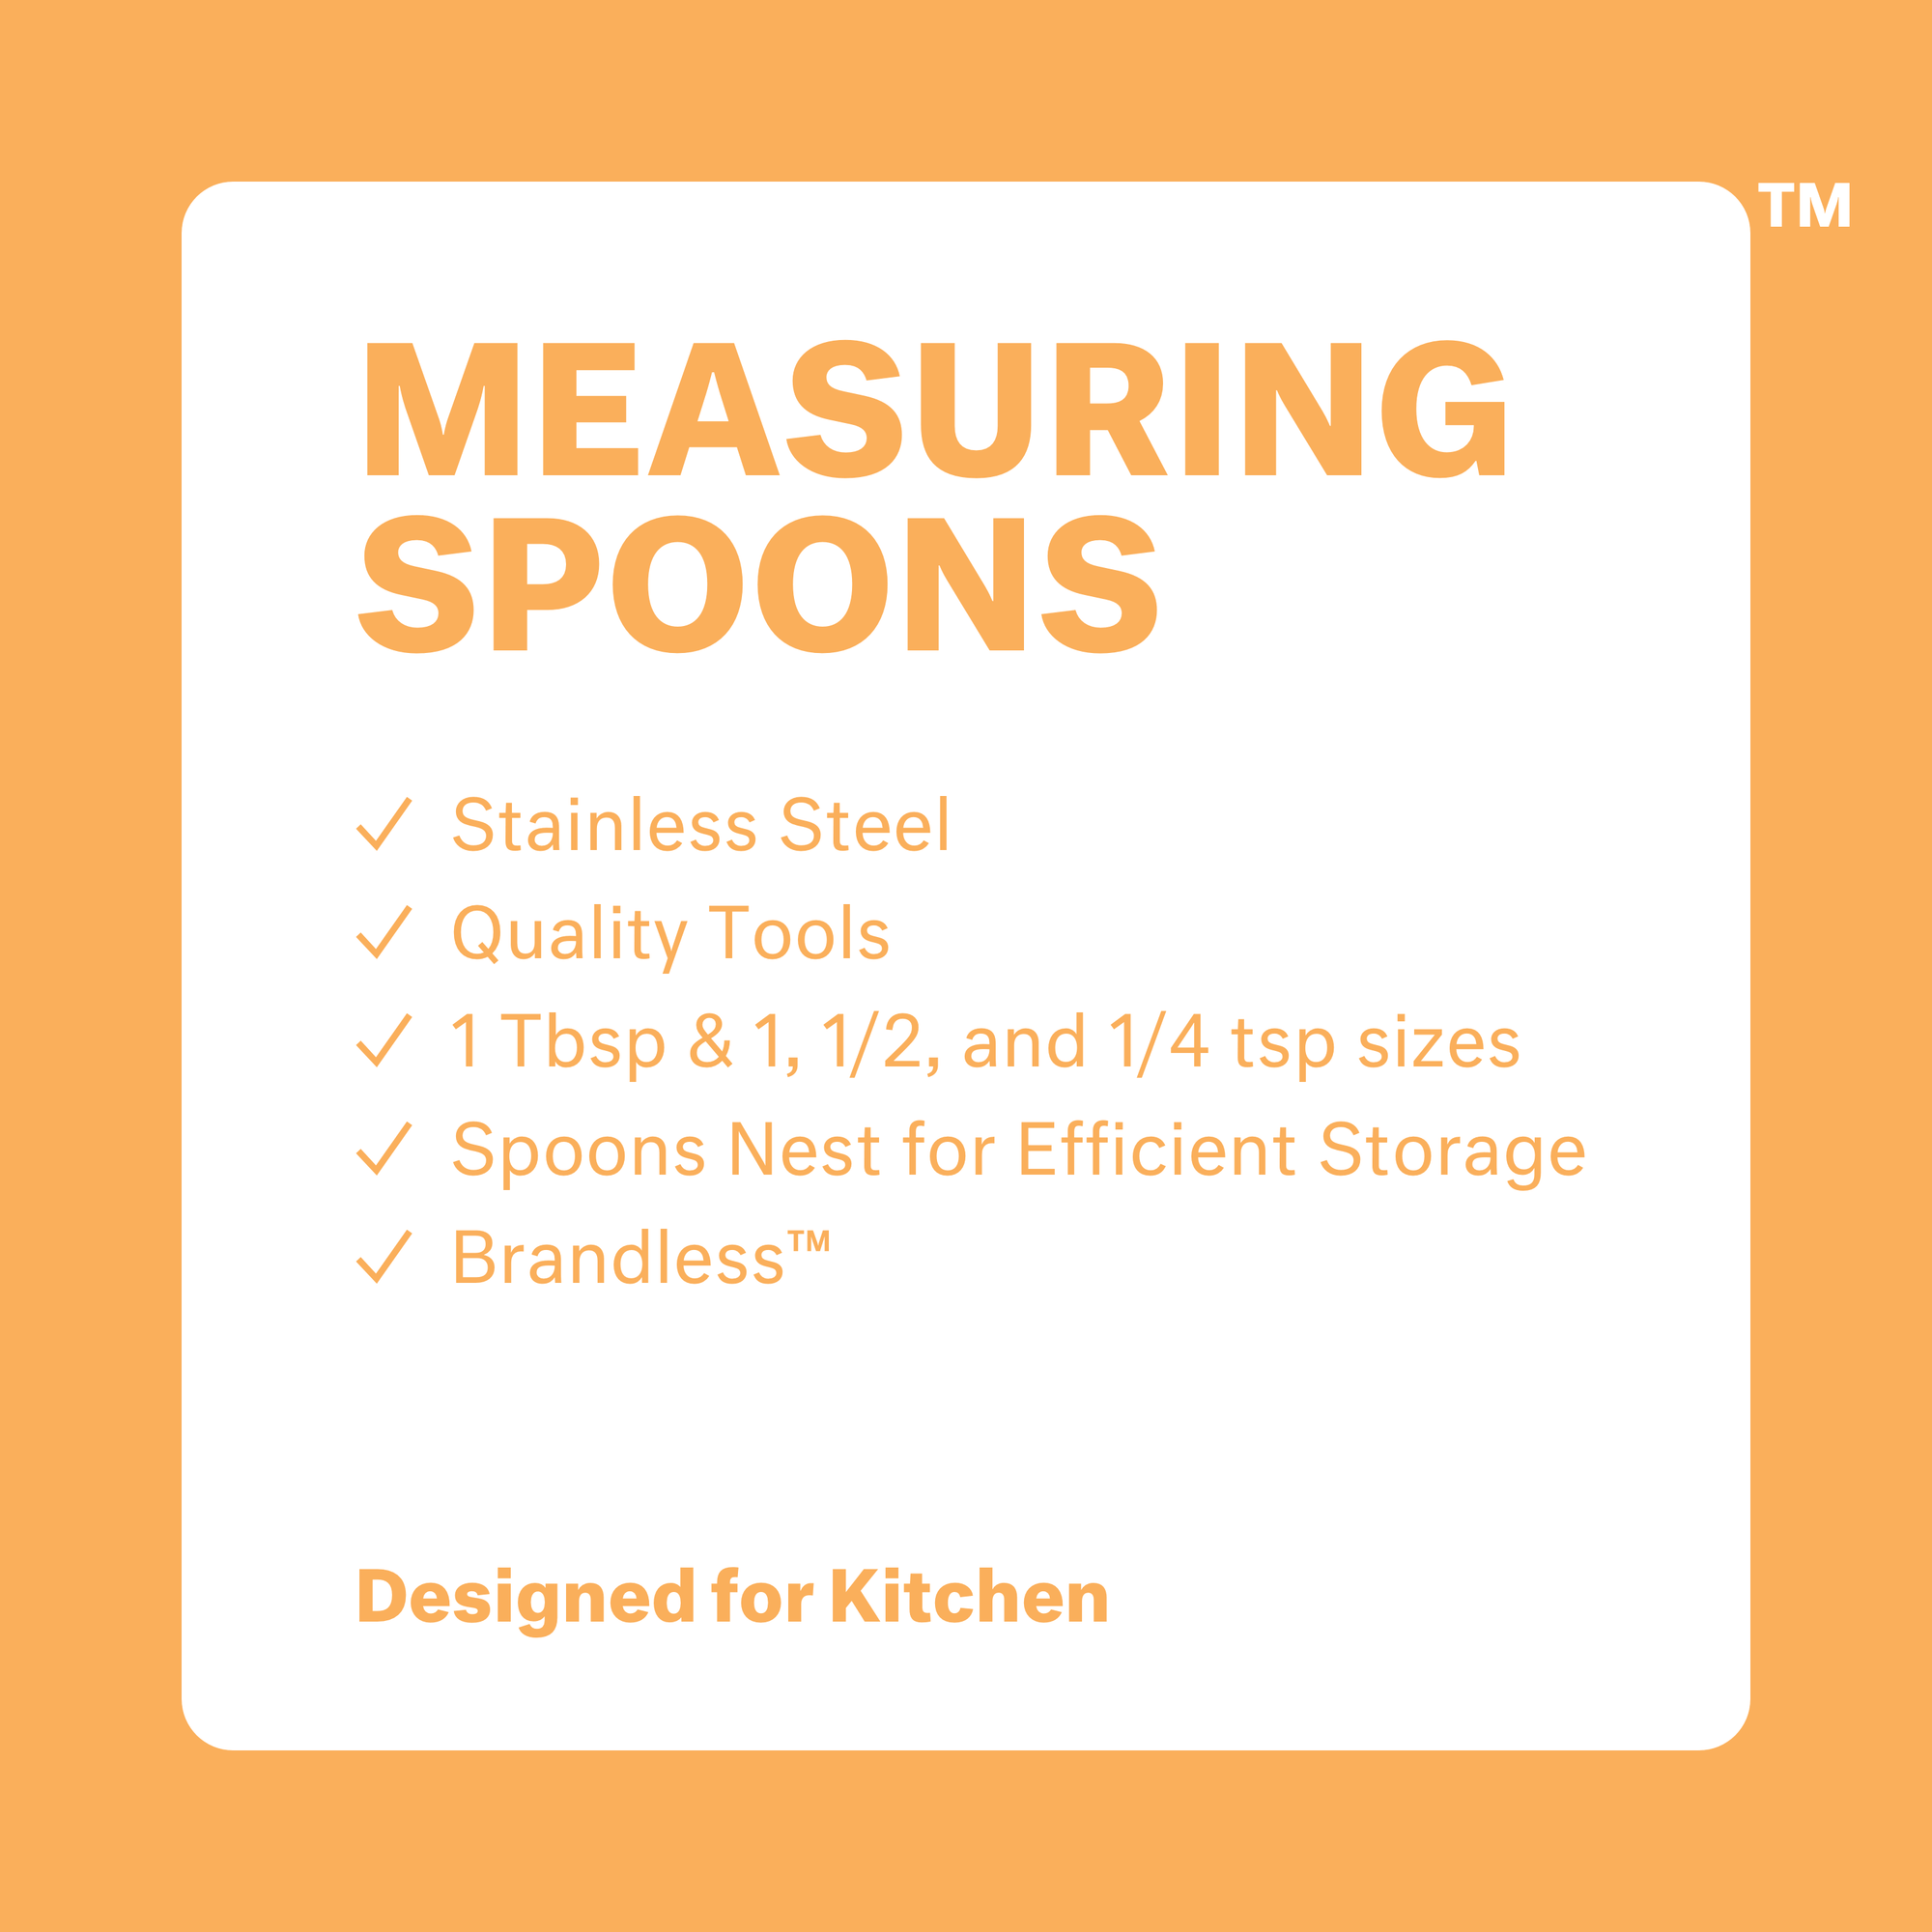 Top view, showing hemispherical spoon shapes of the brandless measuring spoon set.